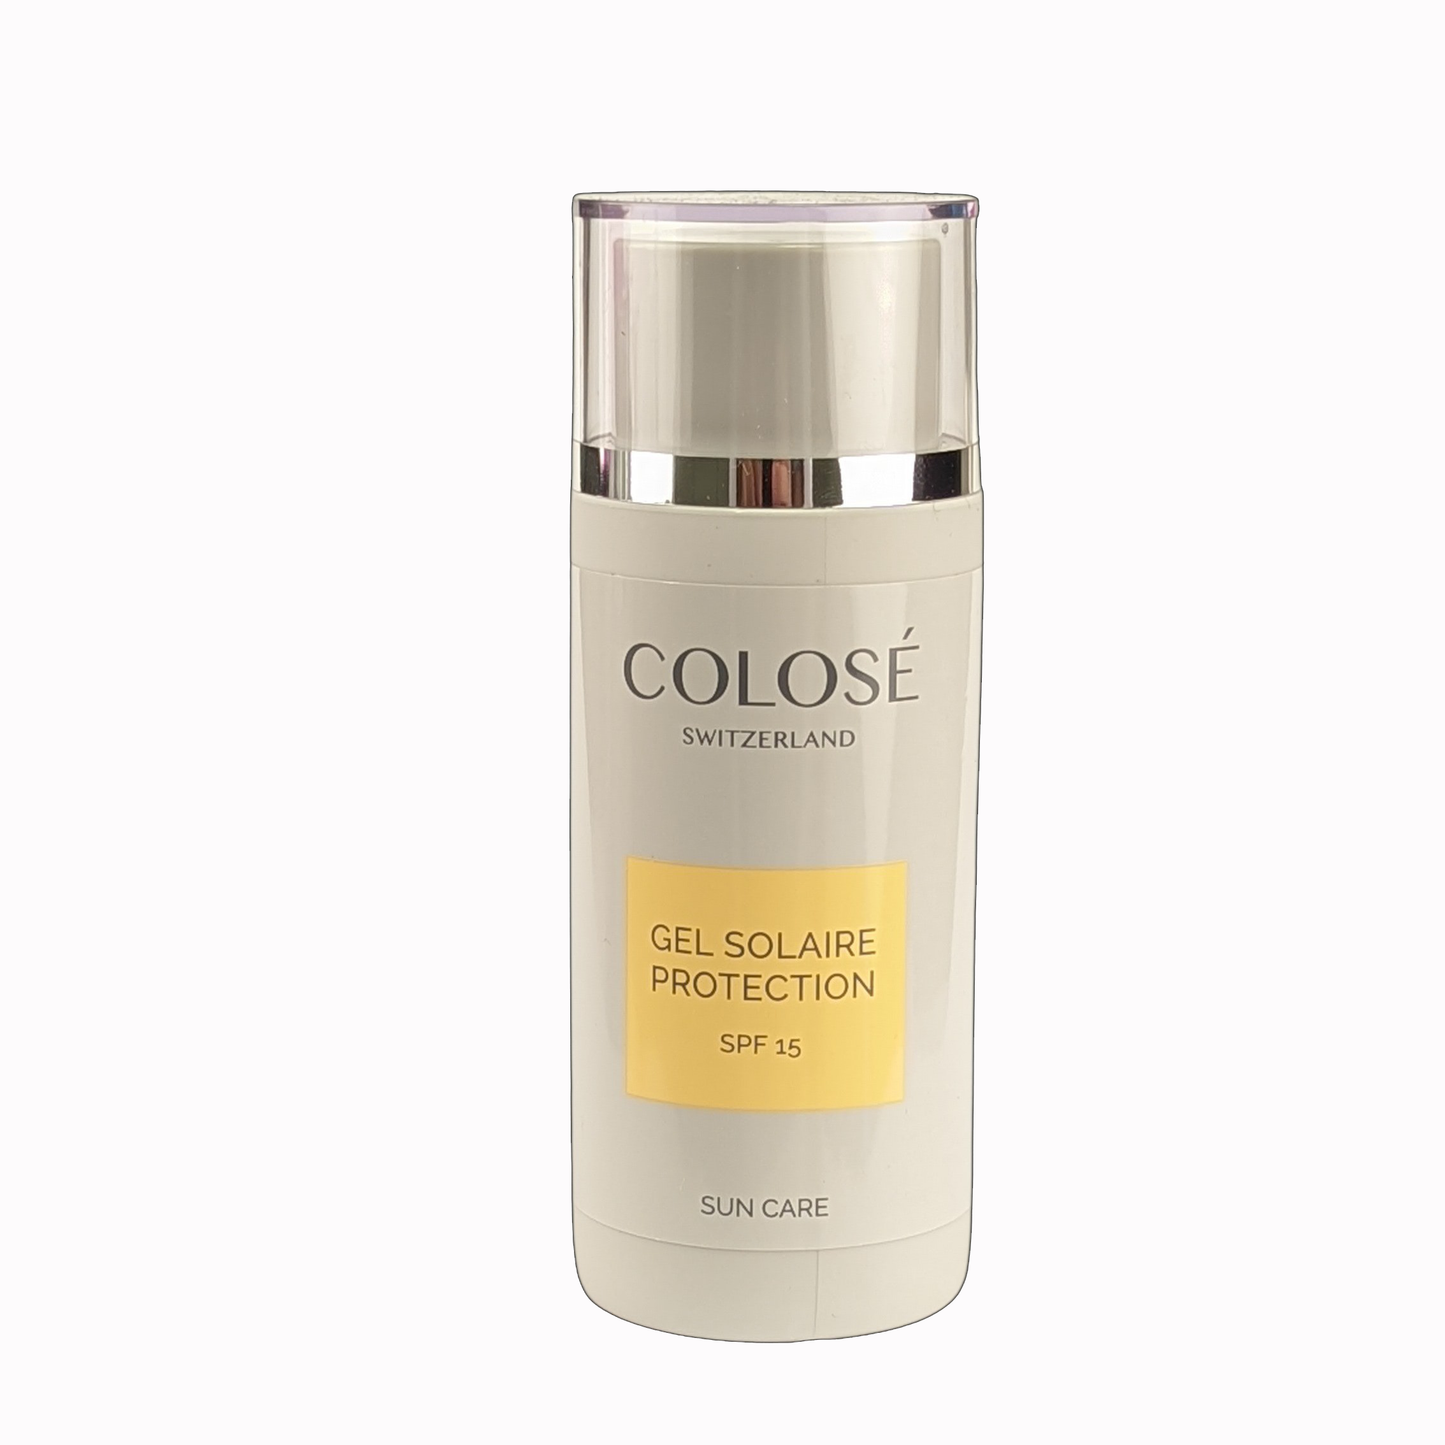 Gel Solaire Protection SPF 15